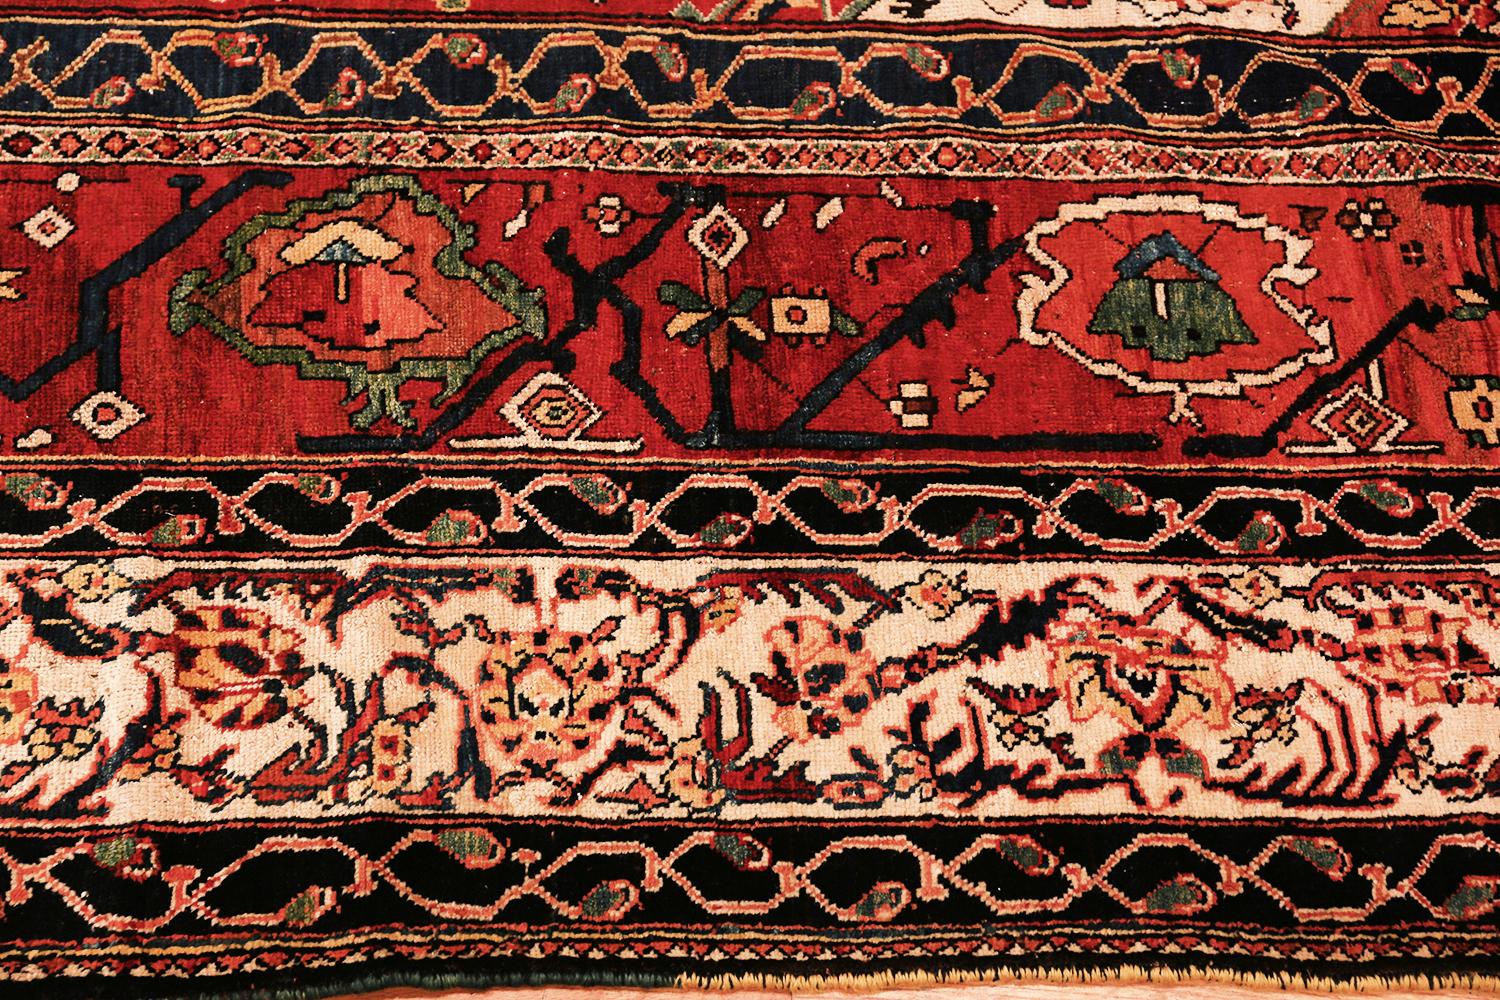 Stunning antique Persian Bakhtiari rug, Origin: Persia, circa 1900. Size: 11 ft 8 in x 14 ft (3.56 m x 4.27 m). This breathtaking carpet is the creation of the Bakhtiari people and was created over 100 years ago. The carpet is in excellent shape and